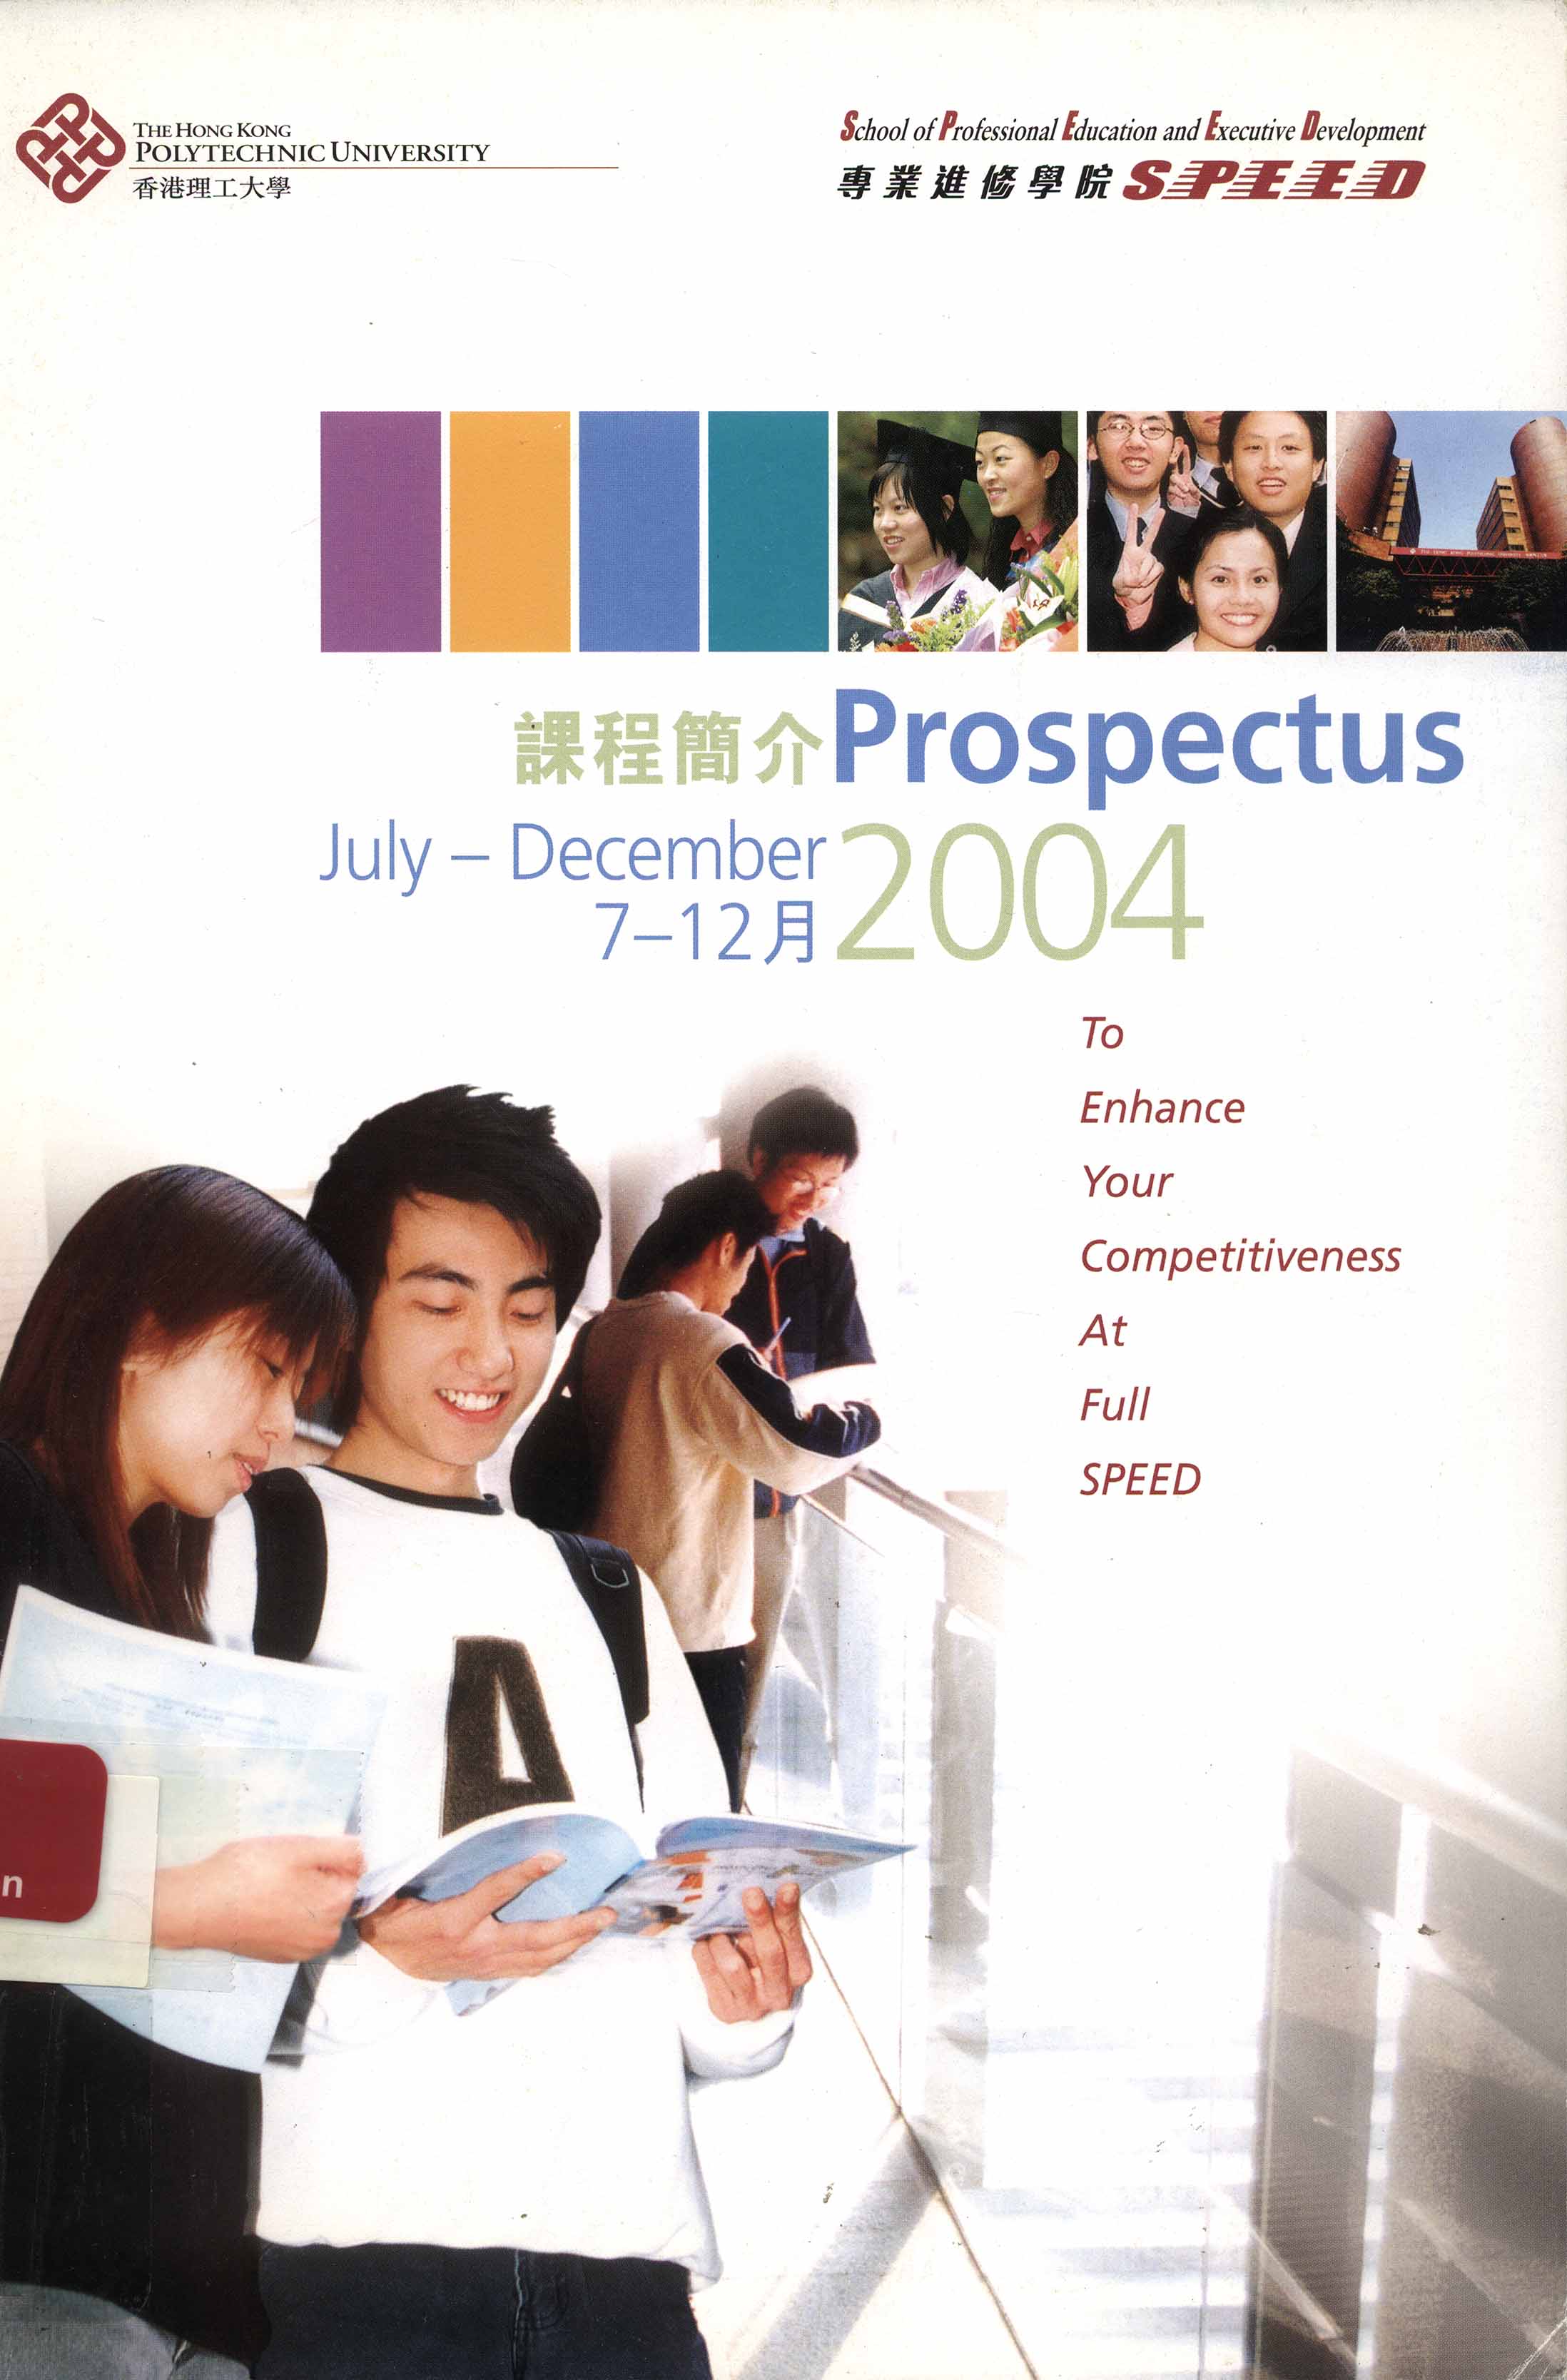 Prospectus [School of Professional Education and Executive Development (SPEED) - July-December 2004]